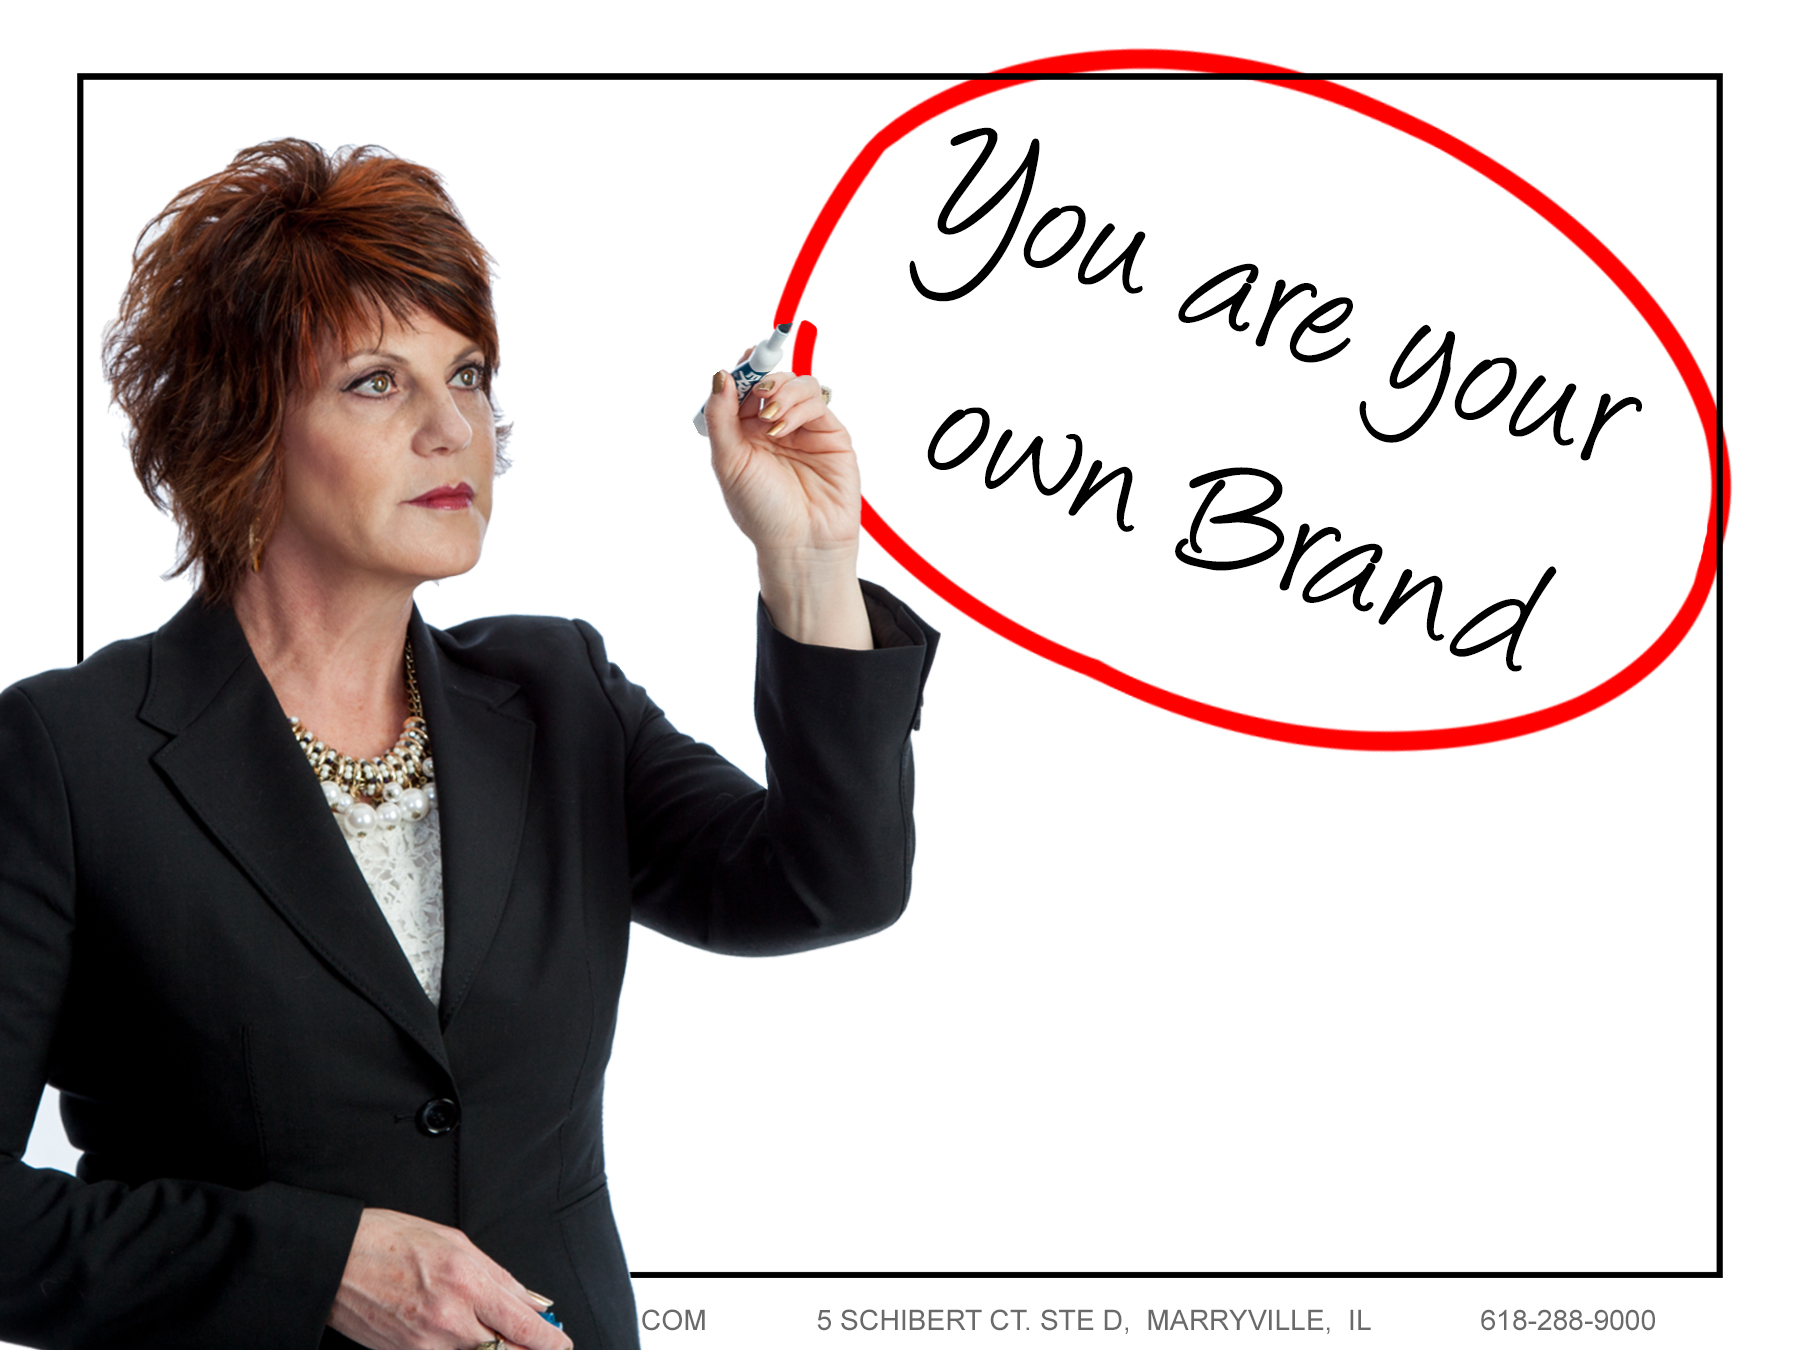 You are your brand